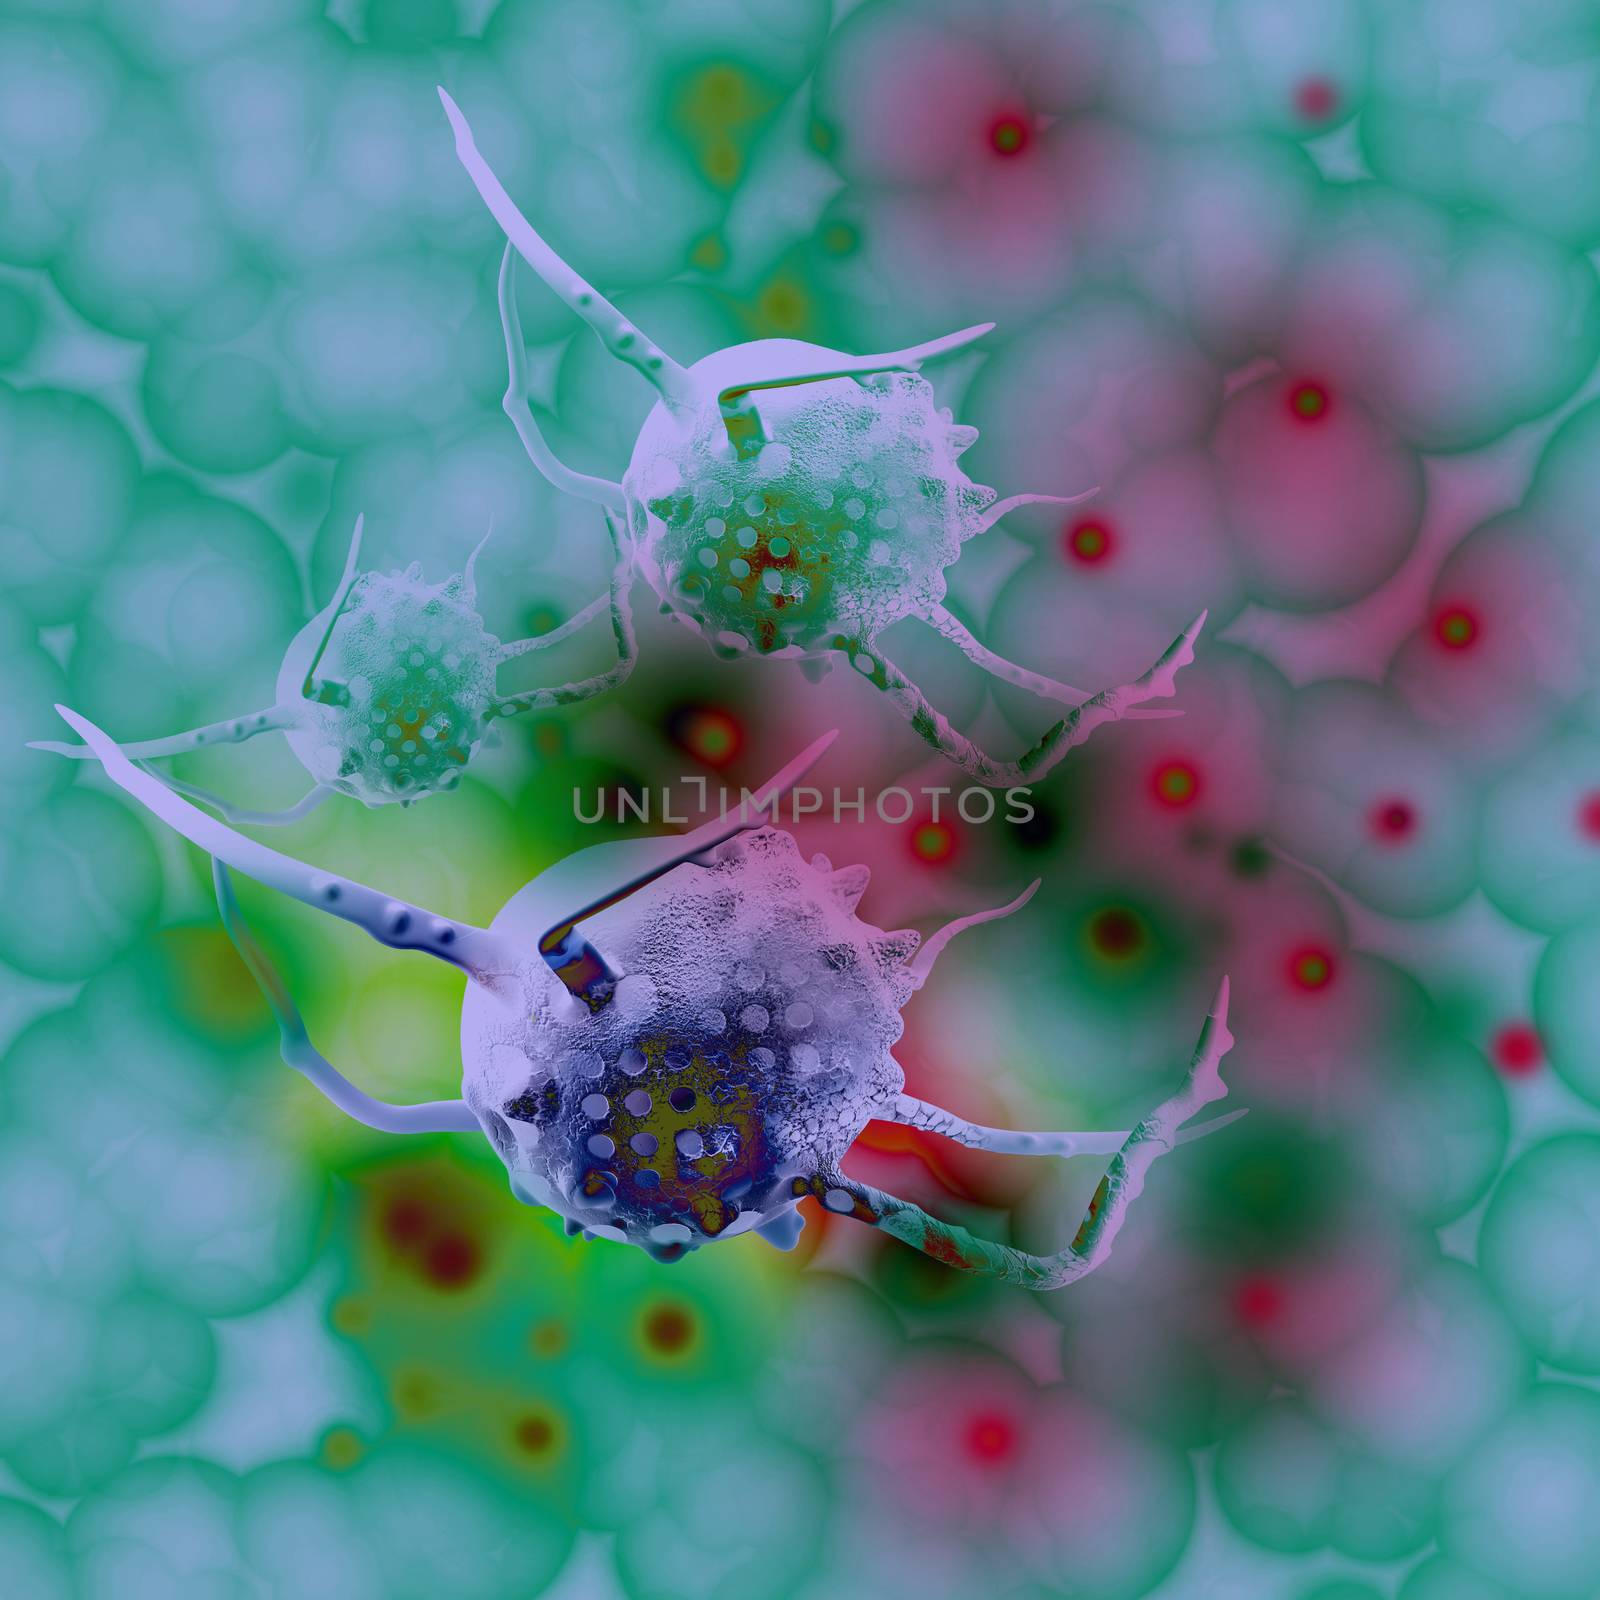 cancer cell made in 3d software